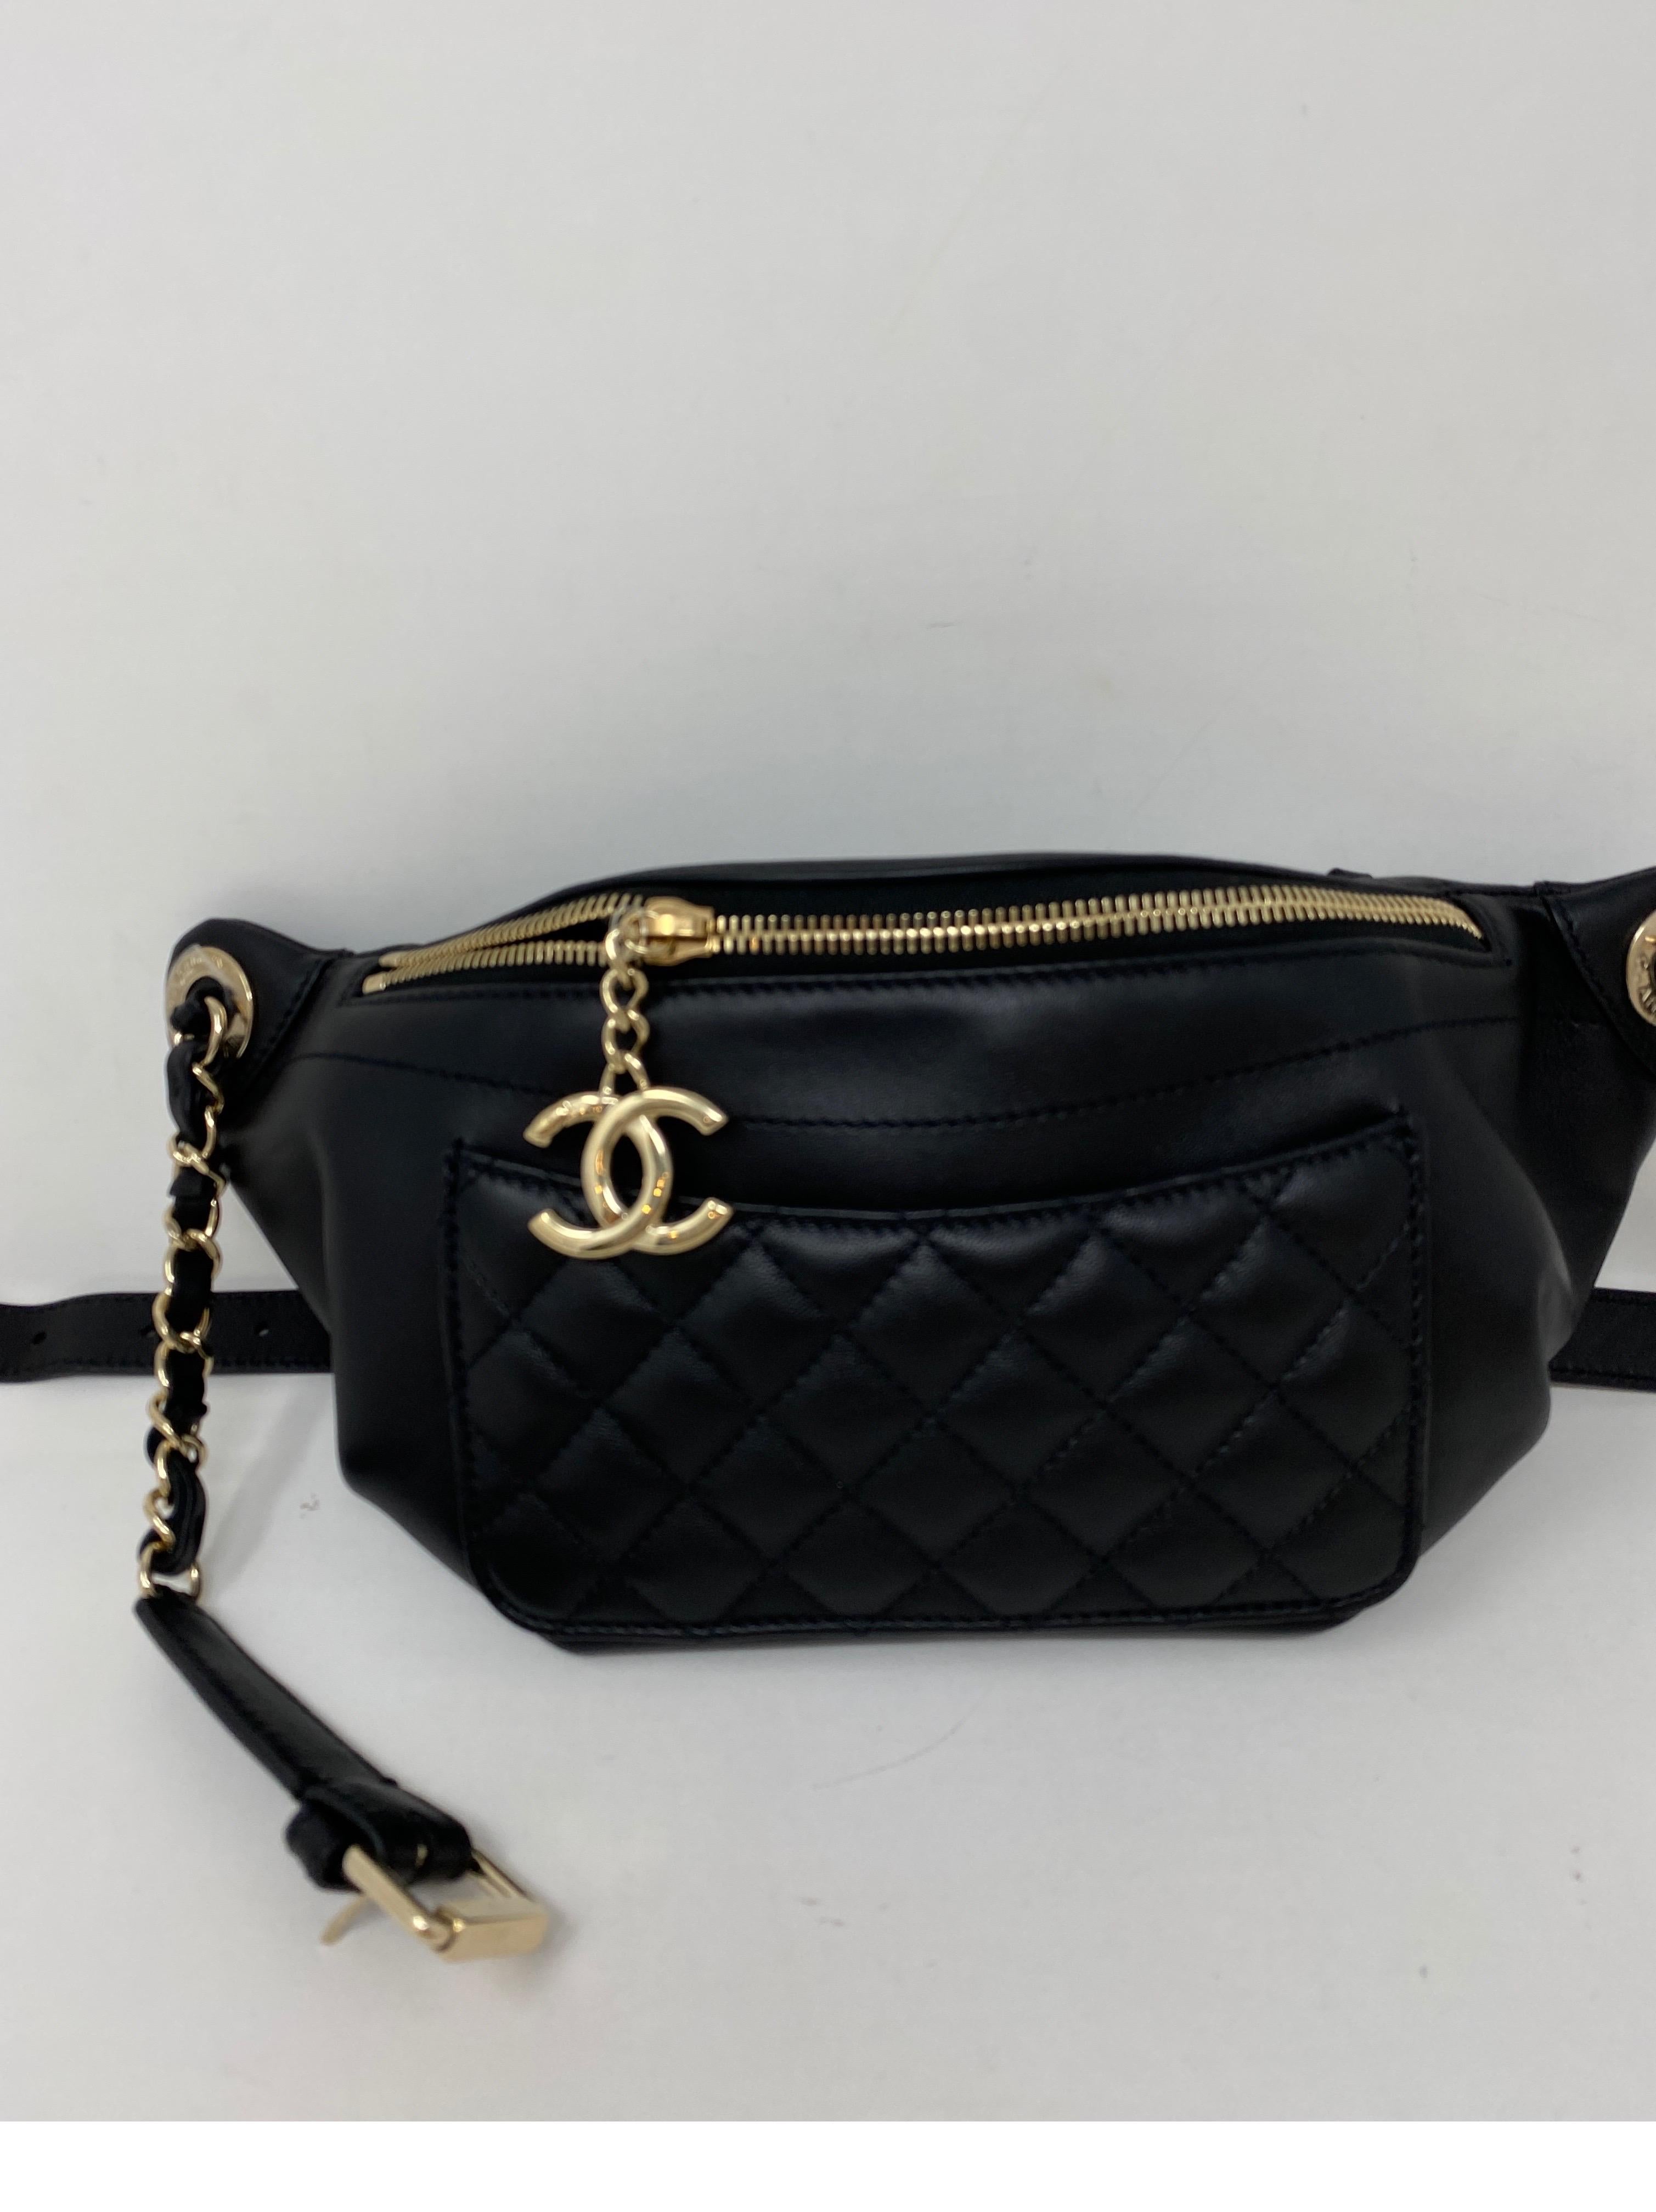 Chanel Black Bum Bag. Mint like new condition. Gold hardware. Beautiful waist belt bag. Can be worn crossbody too. Long adjustable strap. Guaranteed authentic. 